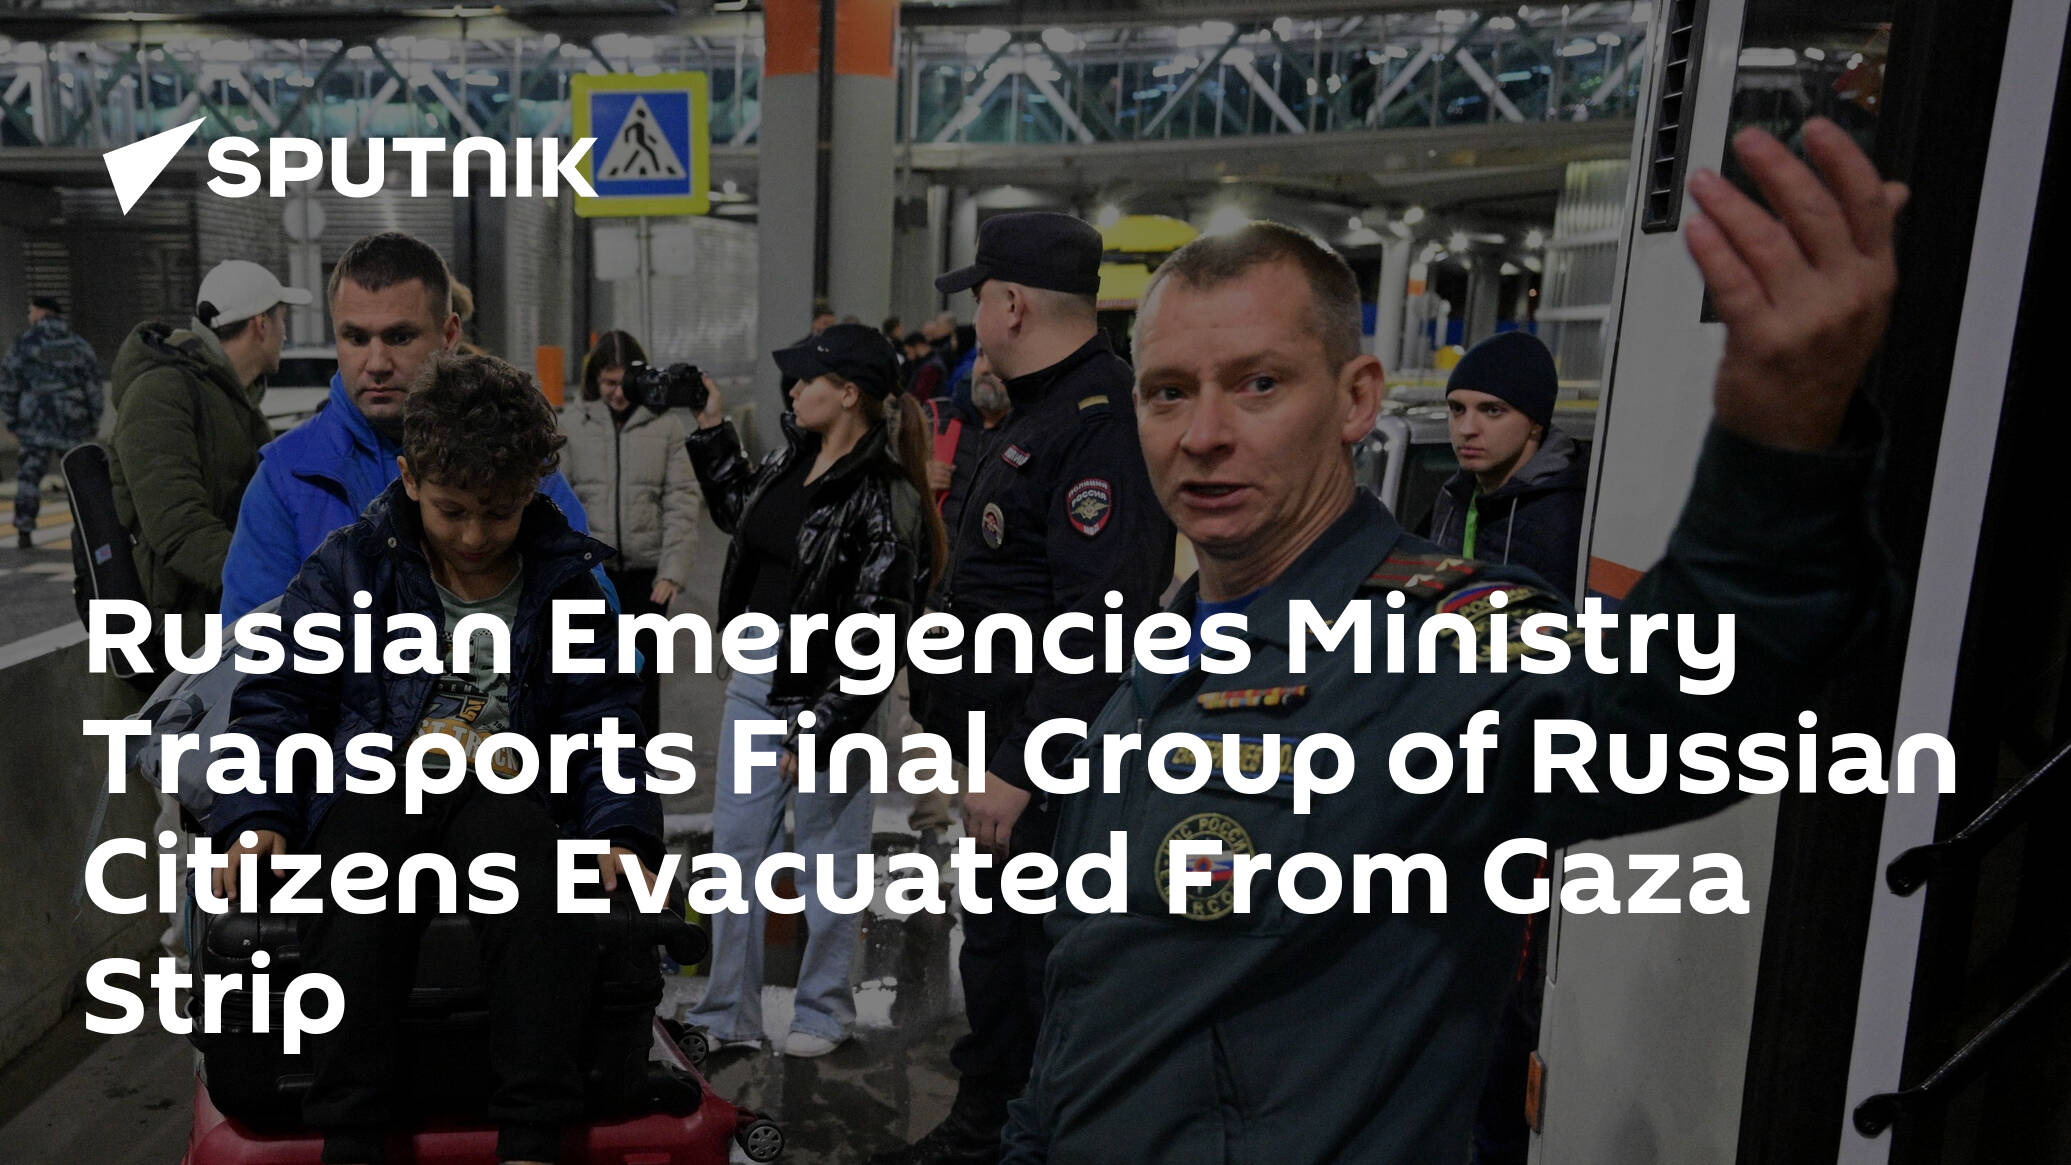 Russian Emergencies Ministry Transports Final Group of Russian Citizens Evacuated From Gaza Strip